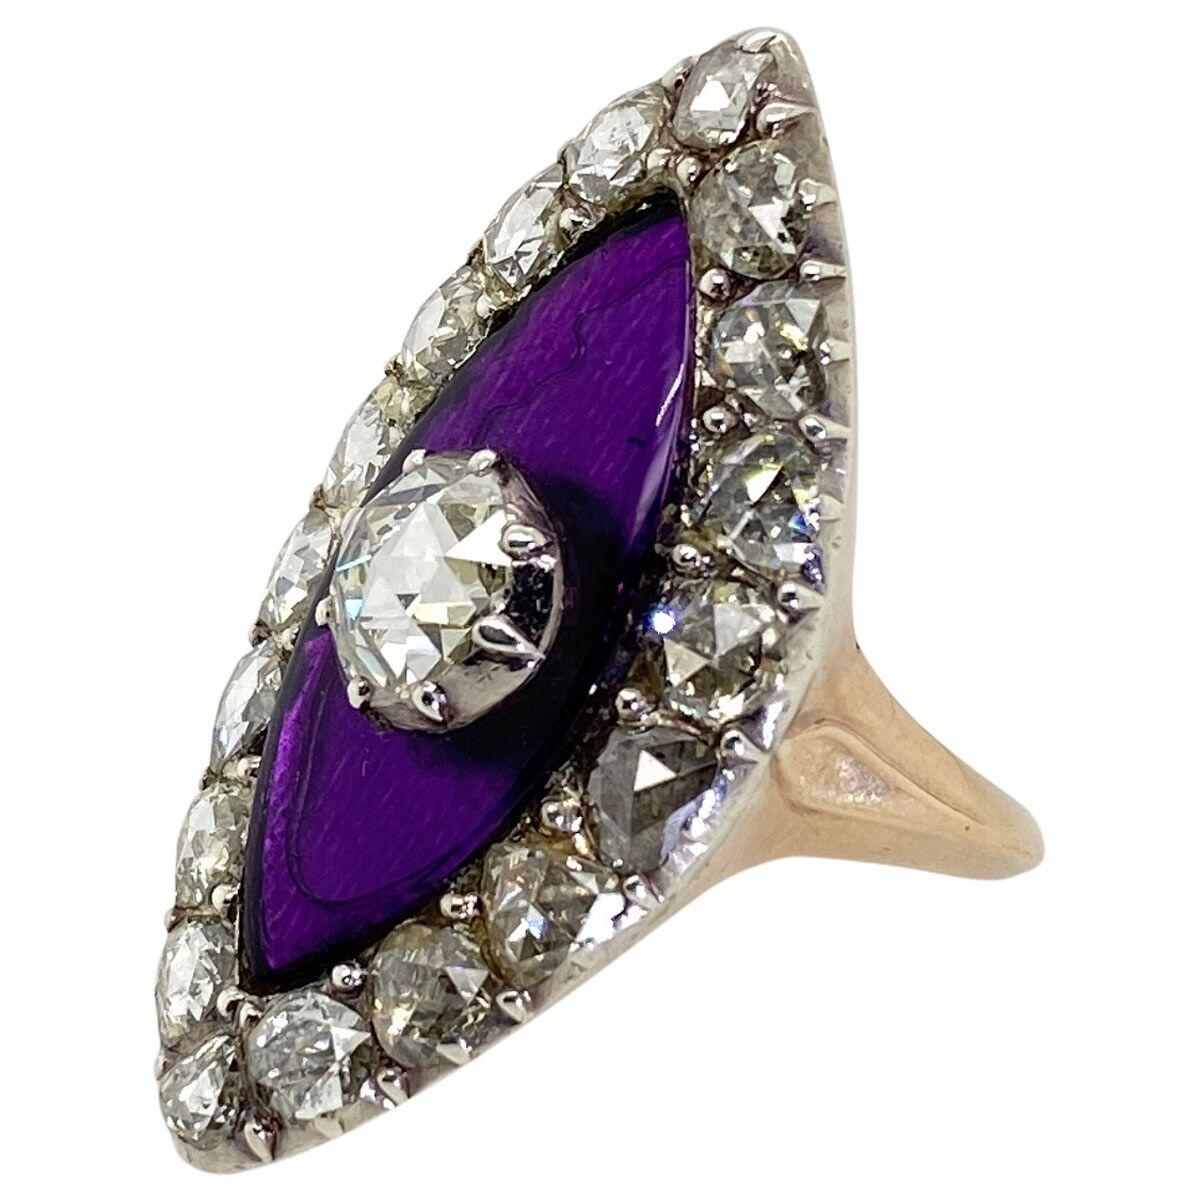 Well isn't this the most impressive cocktail ring on the internet! I think so, it has so many unique elements you certainly won't find another one the same. An original Georgian piece it shows the true craftsmanship of the era with its vibrant